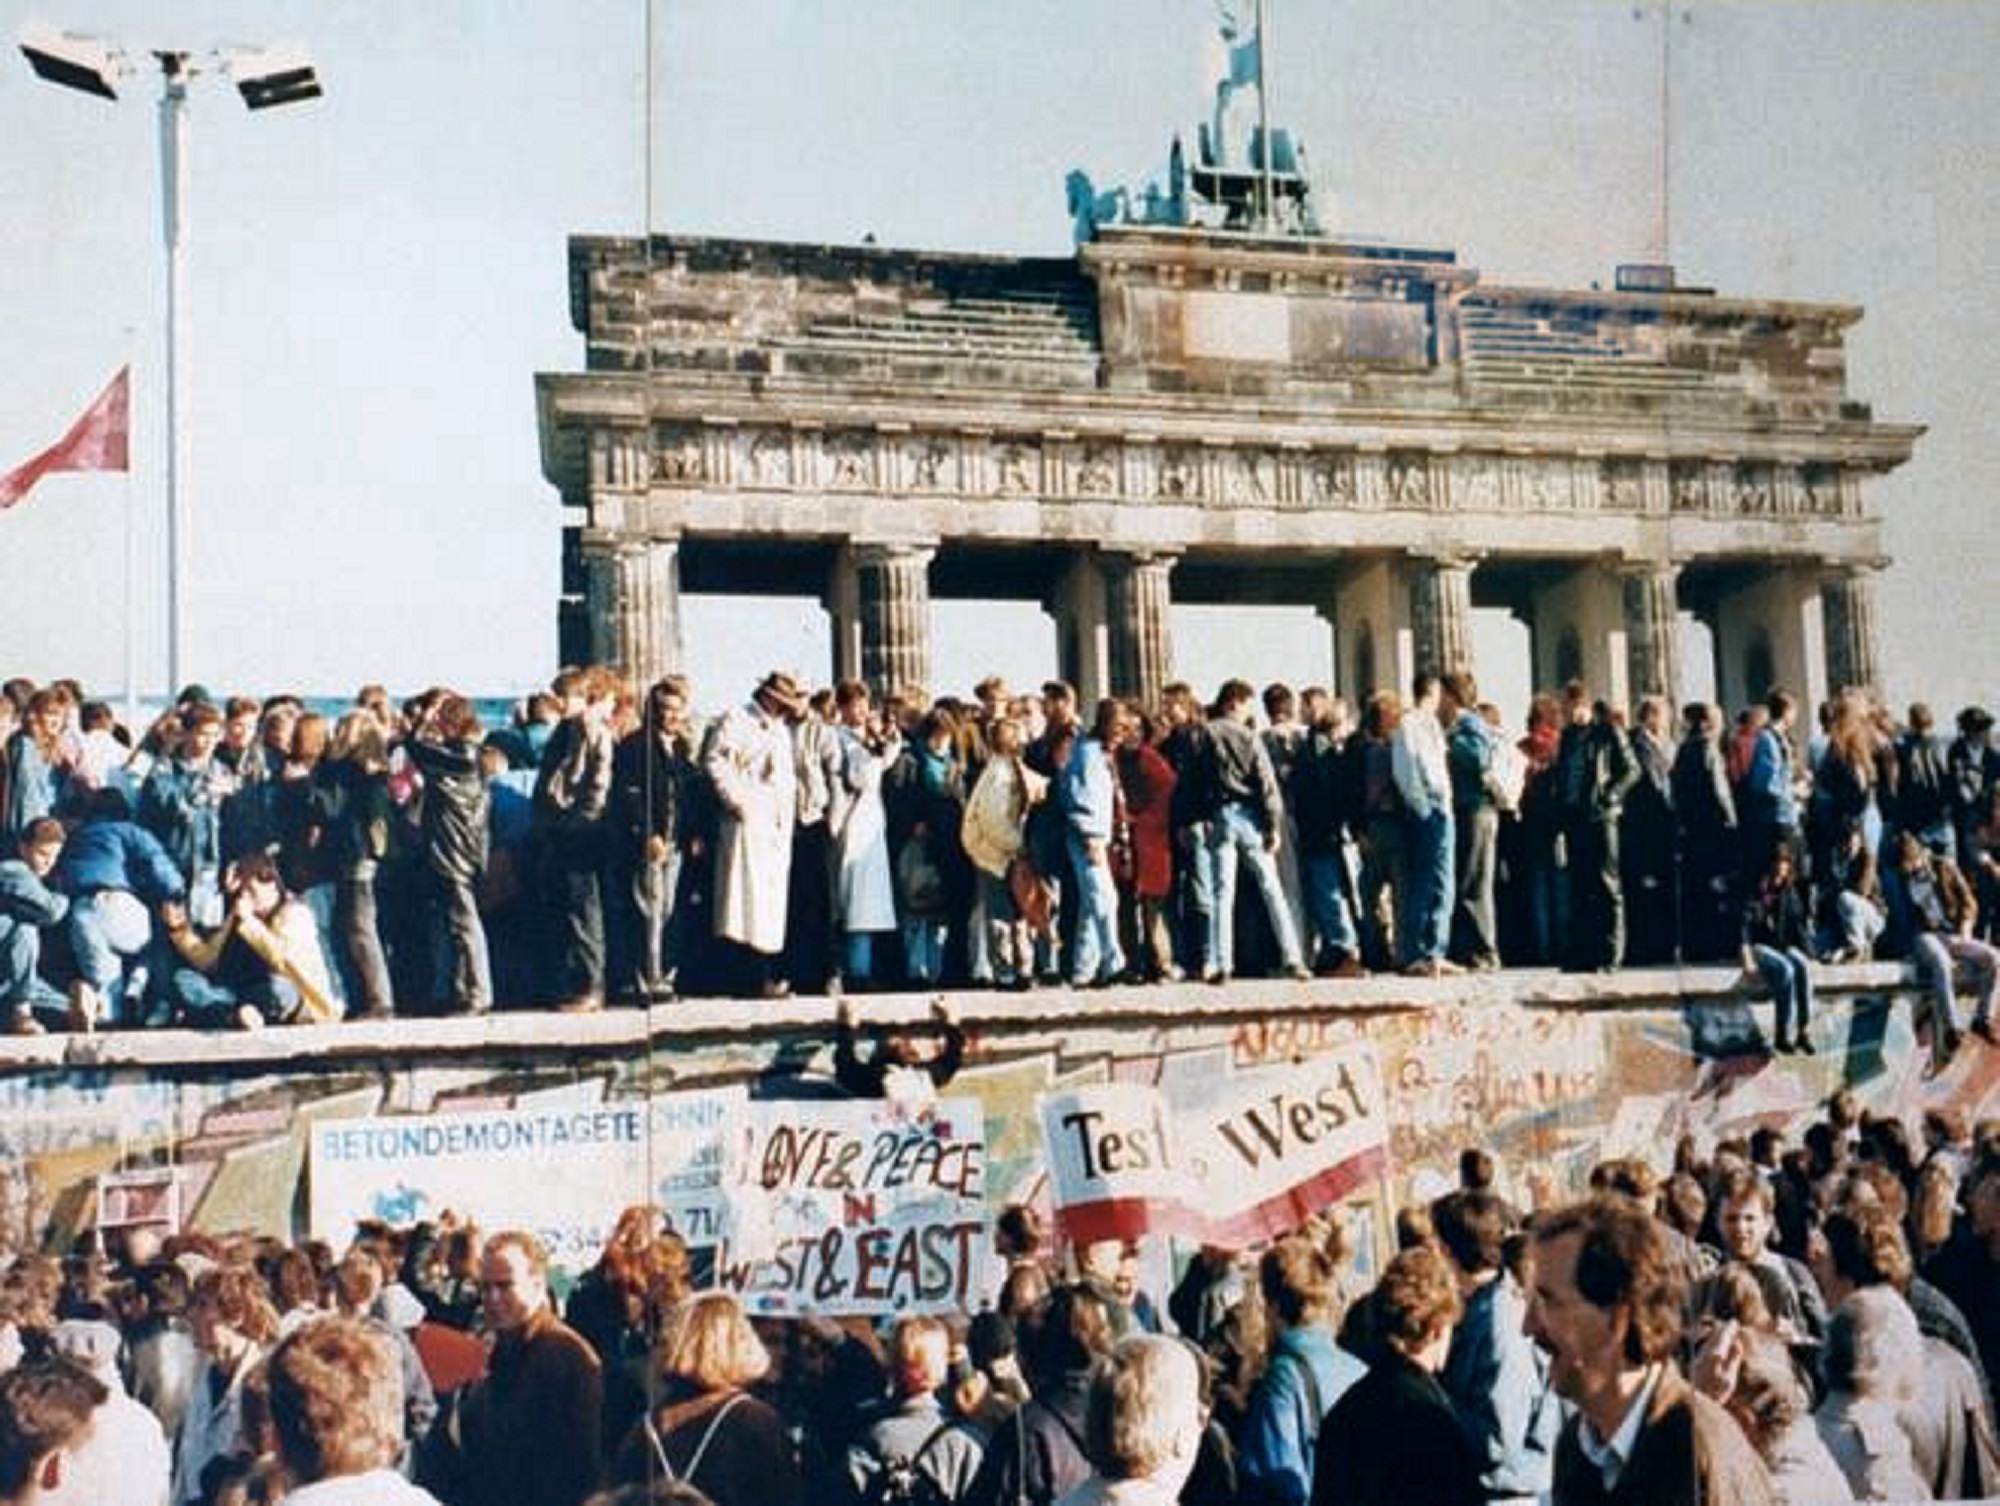 Crowds on top of the Berlin Wall near the Brandenburg Gate